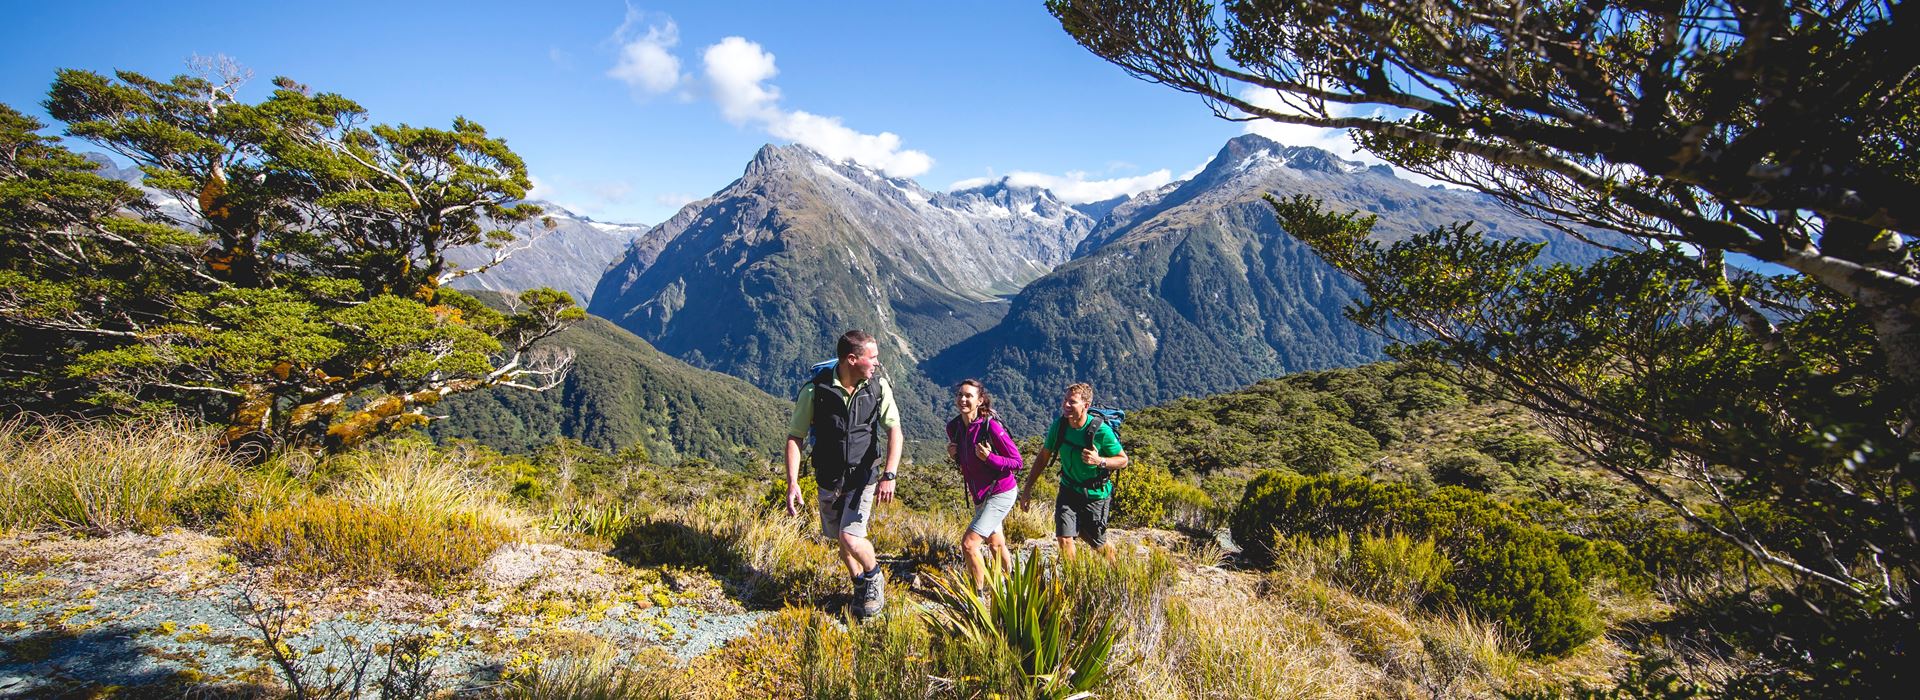 Discover the great outdoors on moderate hiking, biking & cruise tour of our country